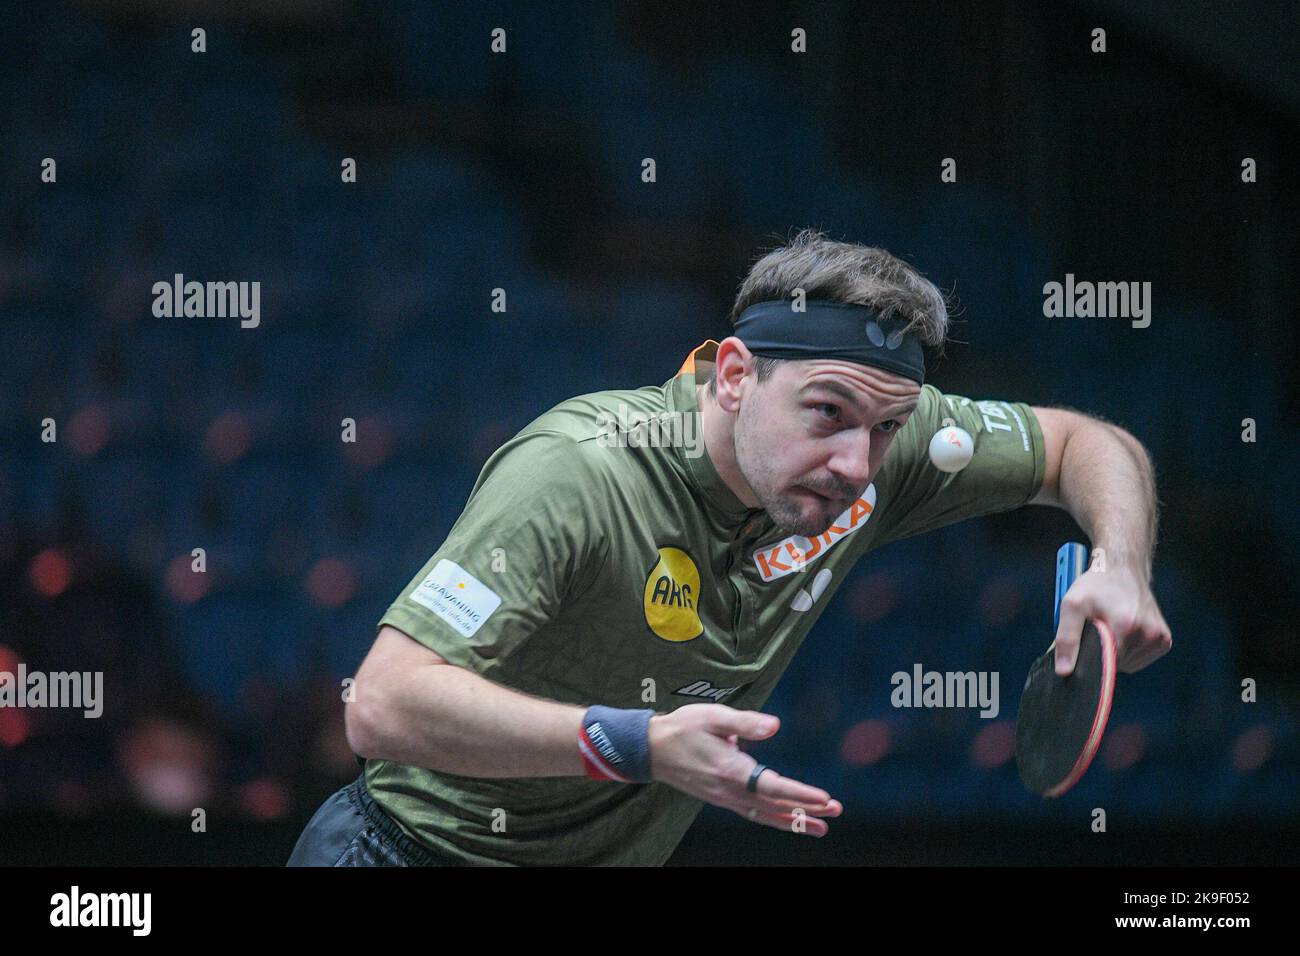 German table tennis player Timo Boll defeated Chinese table tennis player Lin Gaoyuan 3-2 in the mens singles 1/8 finals of 2022 World TeamTennis ( WTT) World Cup, Xinxiang City, central Chinas Henan